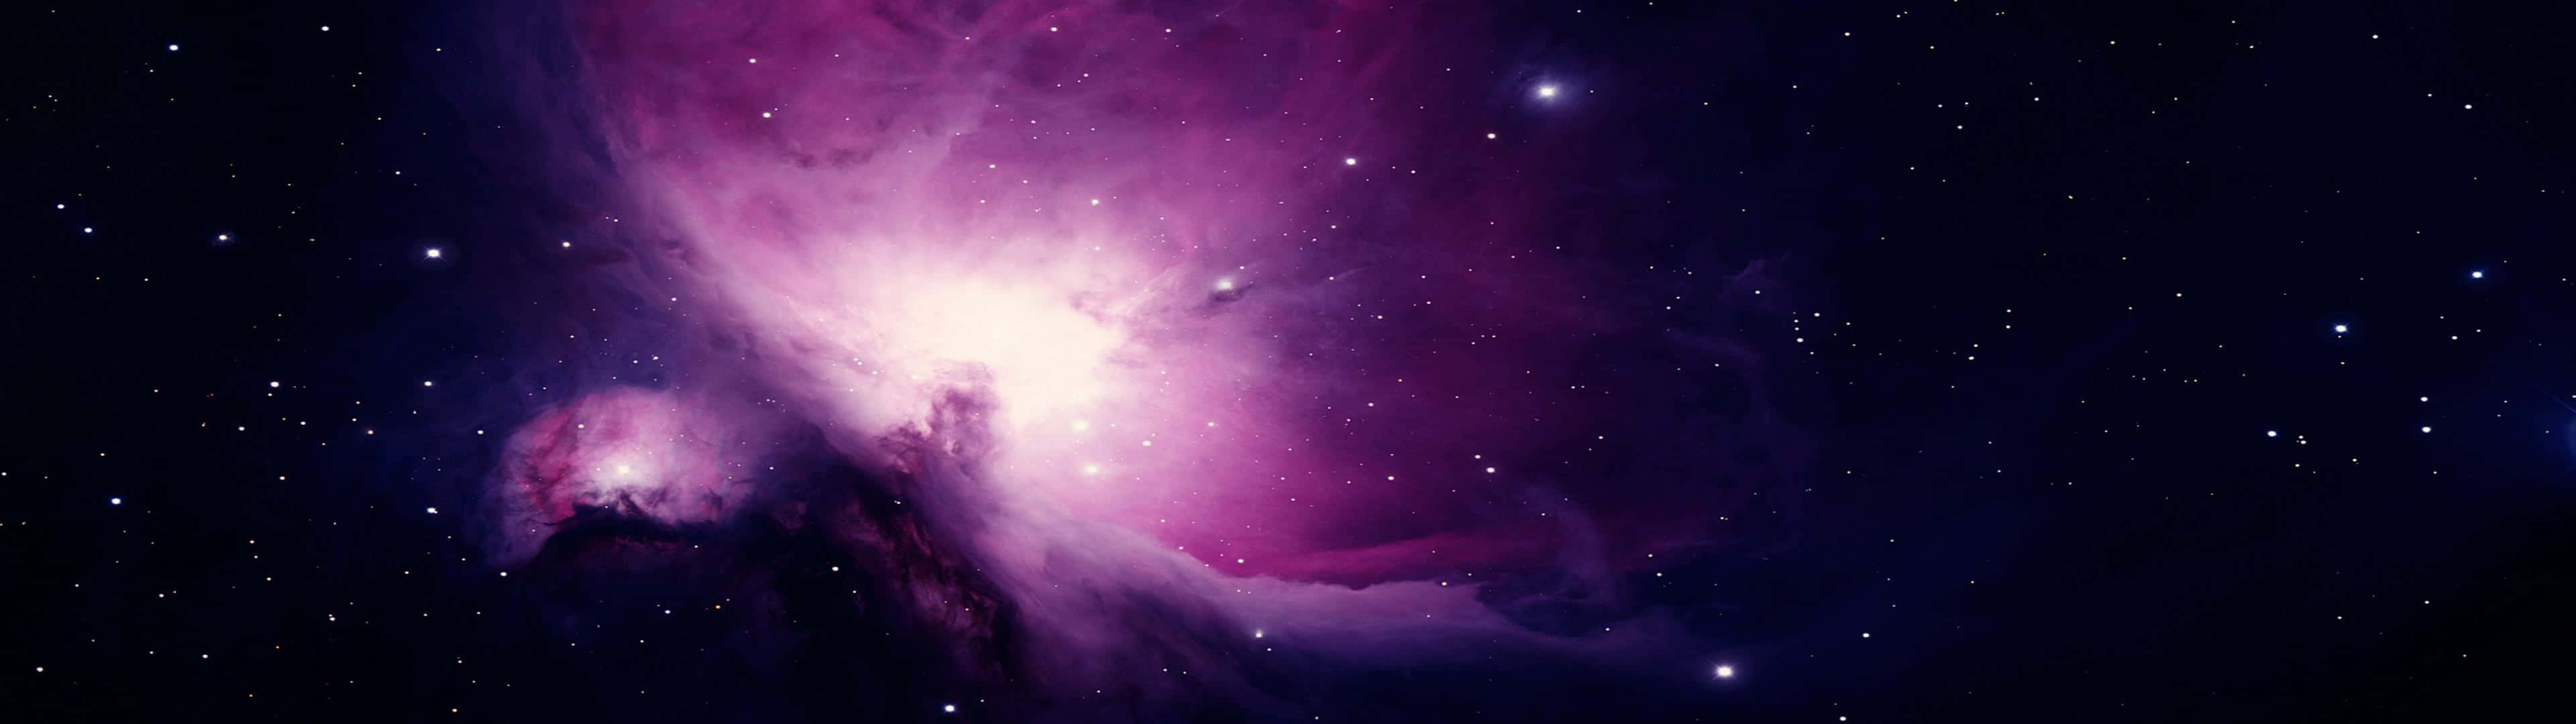 A Purple Nebula In Space With Stars Wallpaper